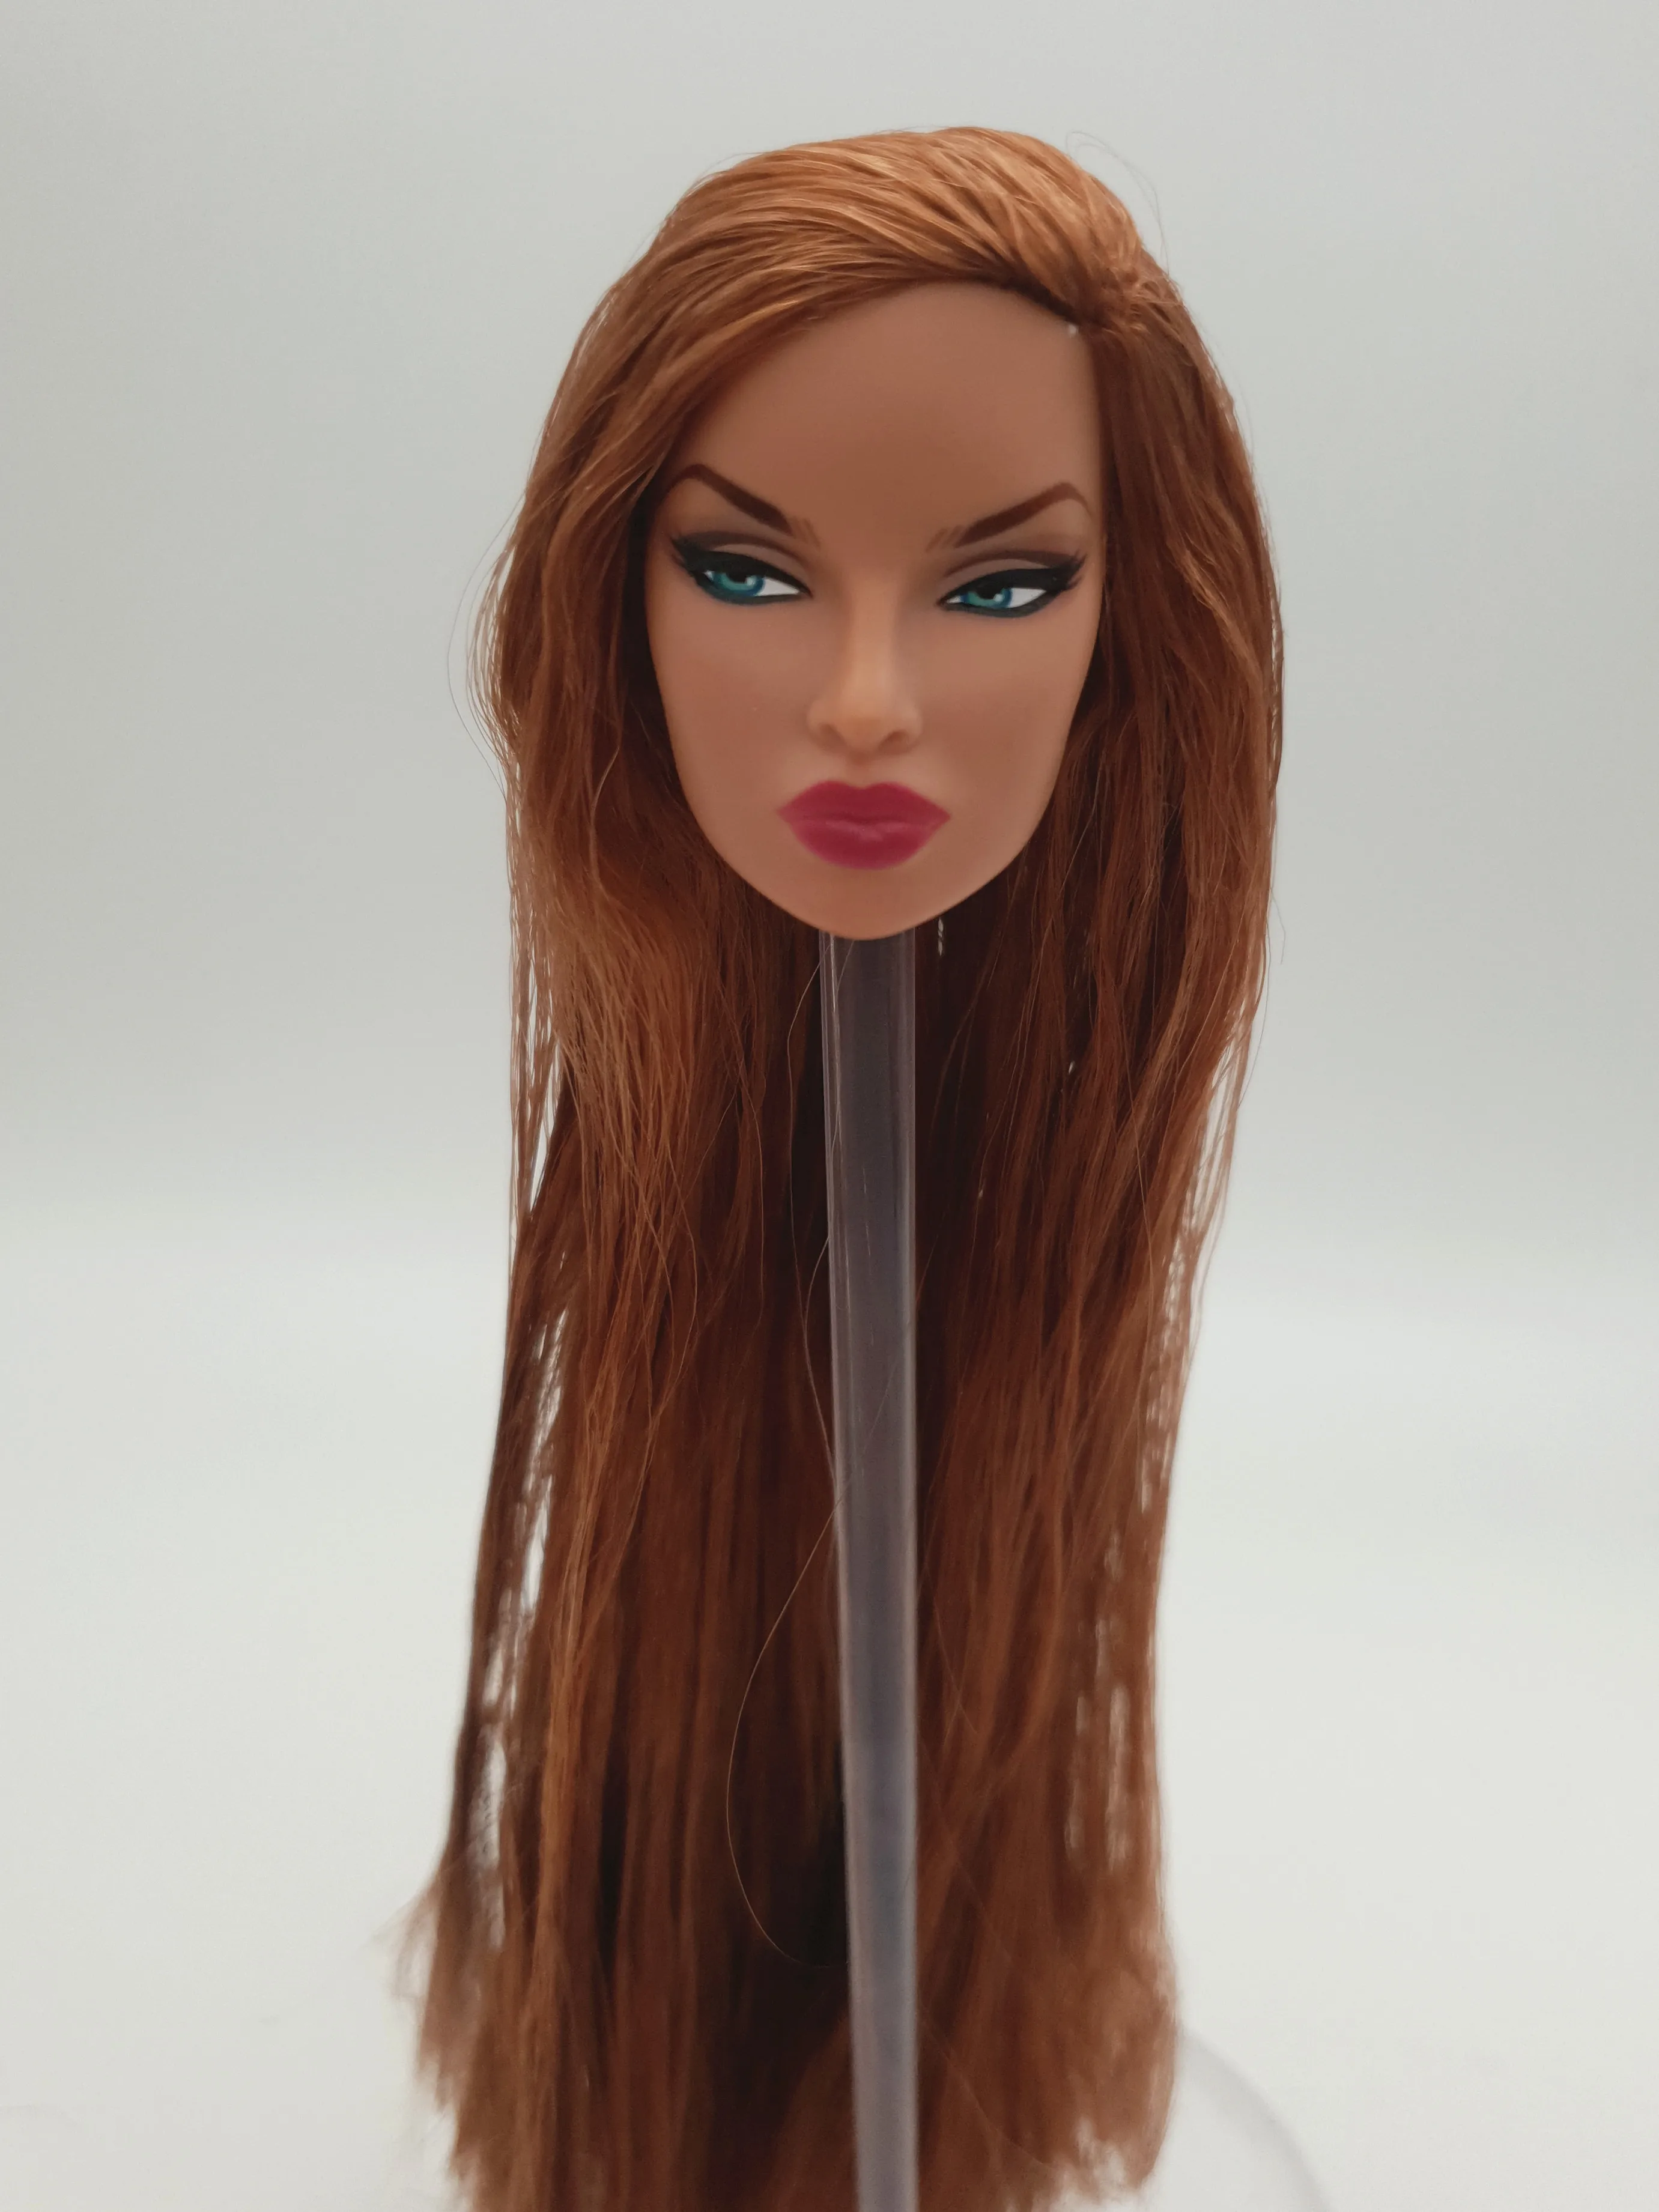 

Fashion Royalty Brown Hair Reroot Ruffles and Blooms Eugenia Perrin-Frost Hungarian Skin Integrity 1/6 Scale Doll Head